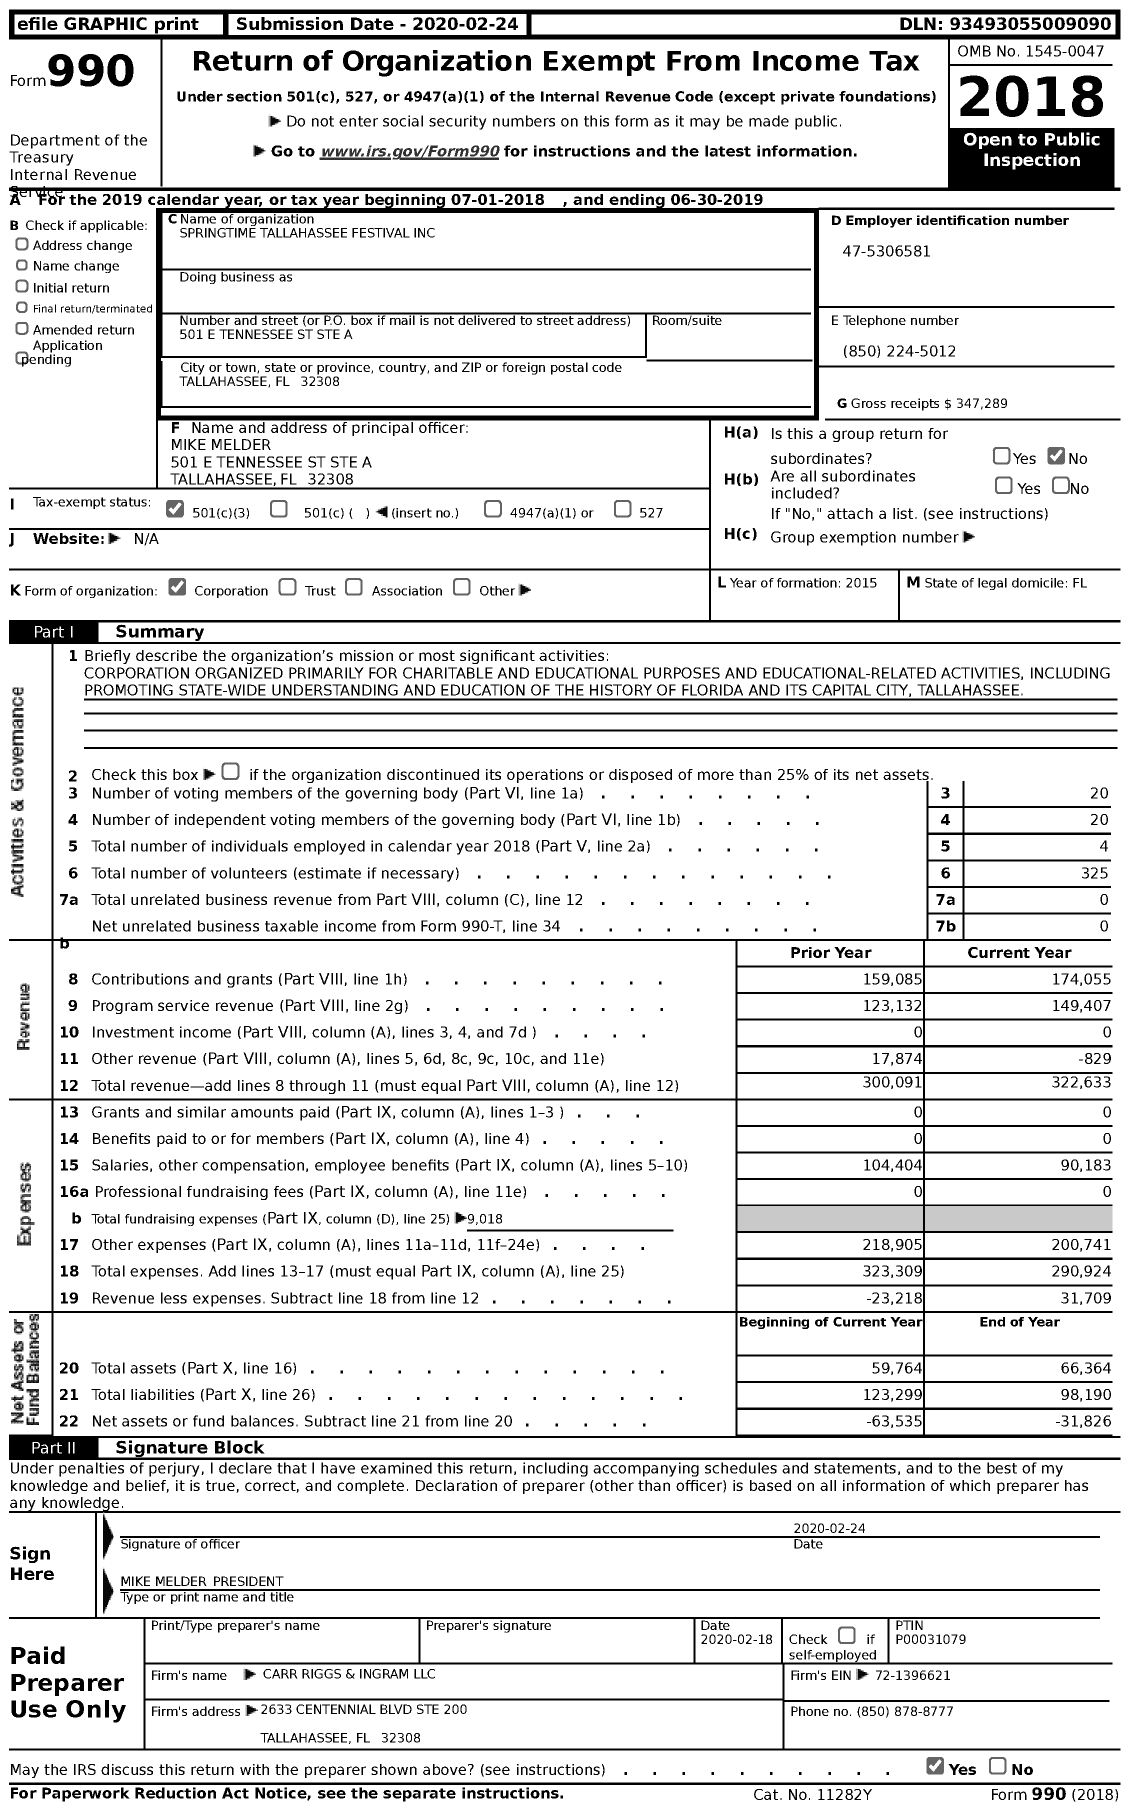 Image of first page of 2018 Form 990 for Springtime Tallahassee Festival